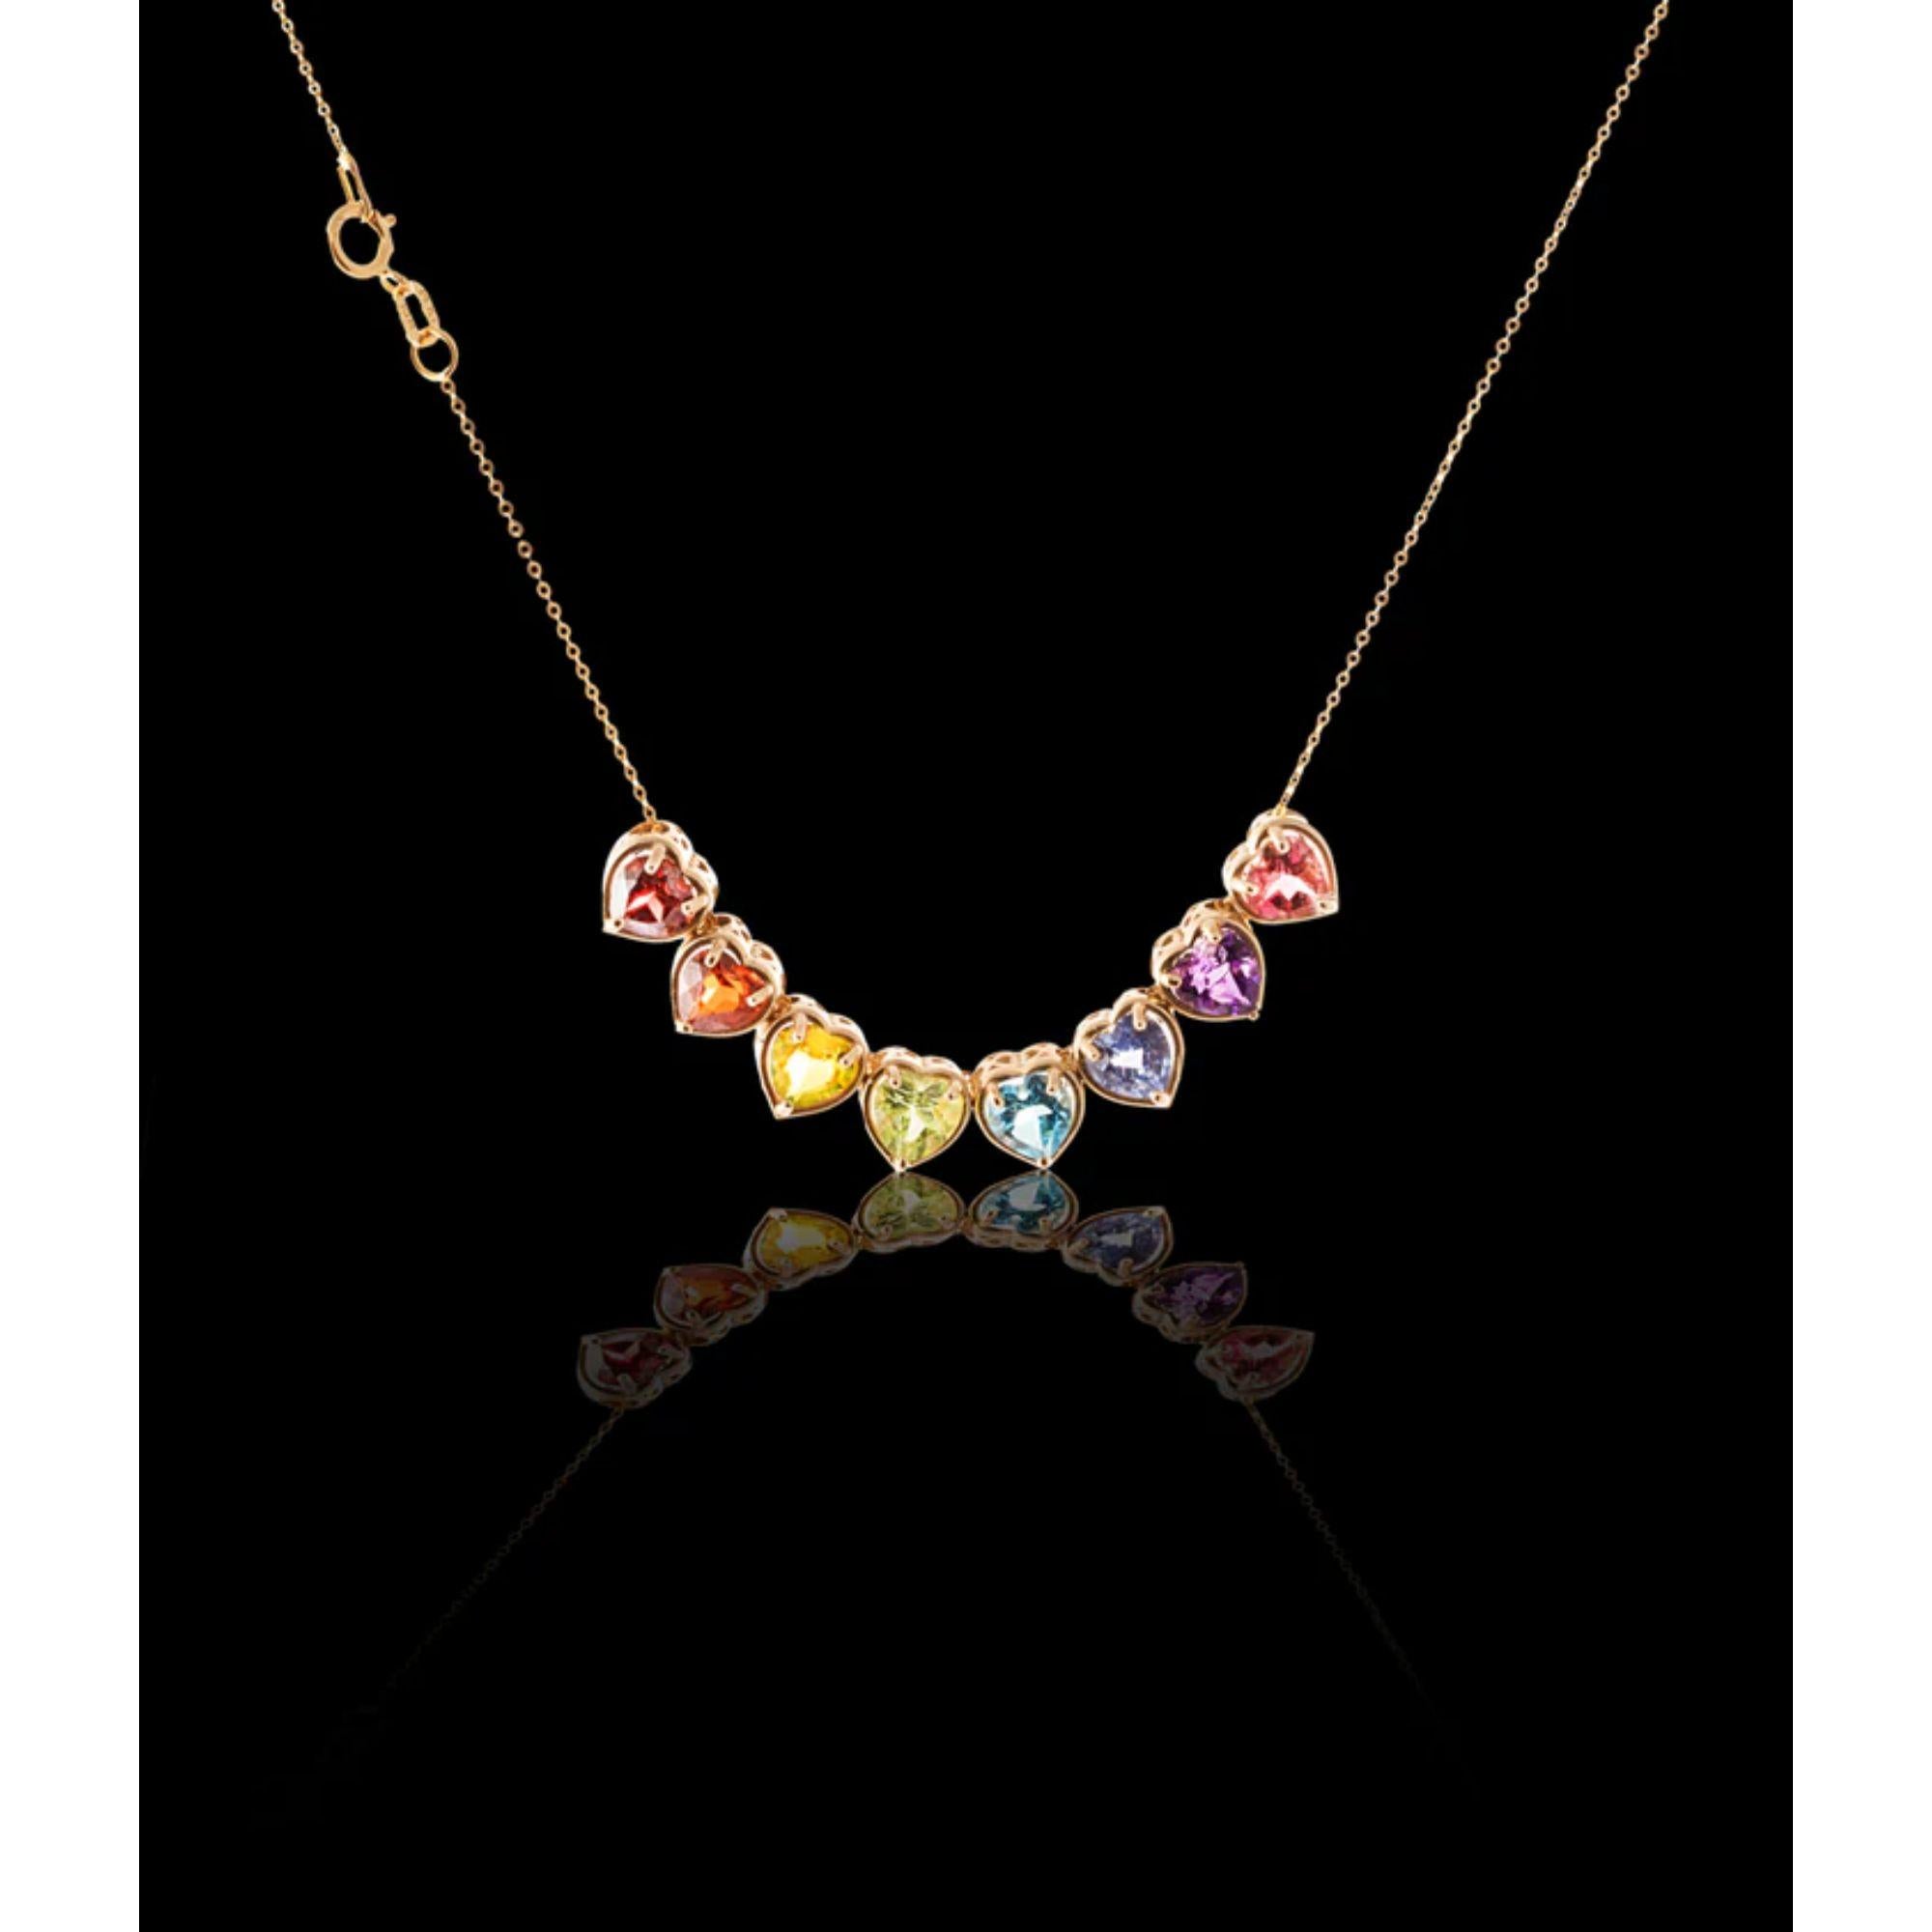 The full rainbow fantasy in the most unique and colorful slider, pendant necklace to light up your neck. This slider necklace is like no other and consists of heart settings with precious gems and sapphires in the Classic Mordekai rainbow pattern.